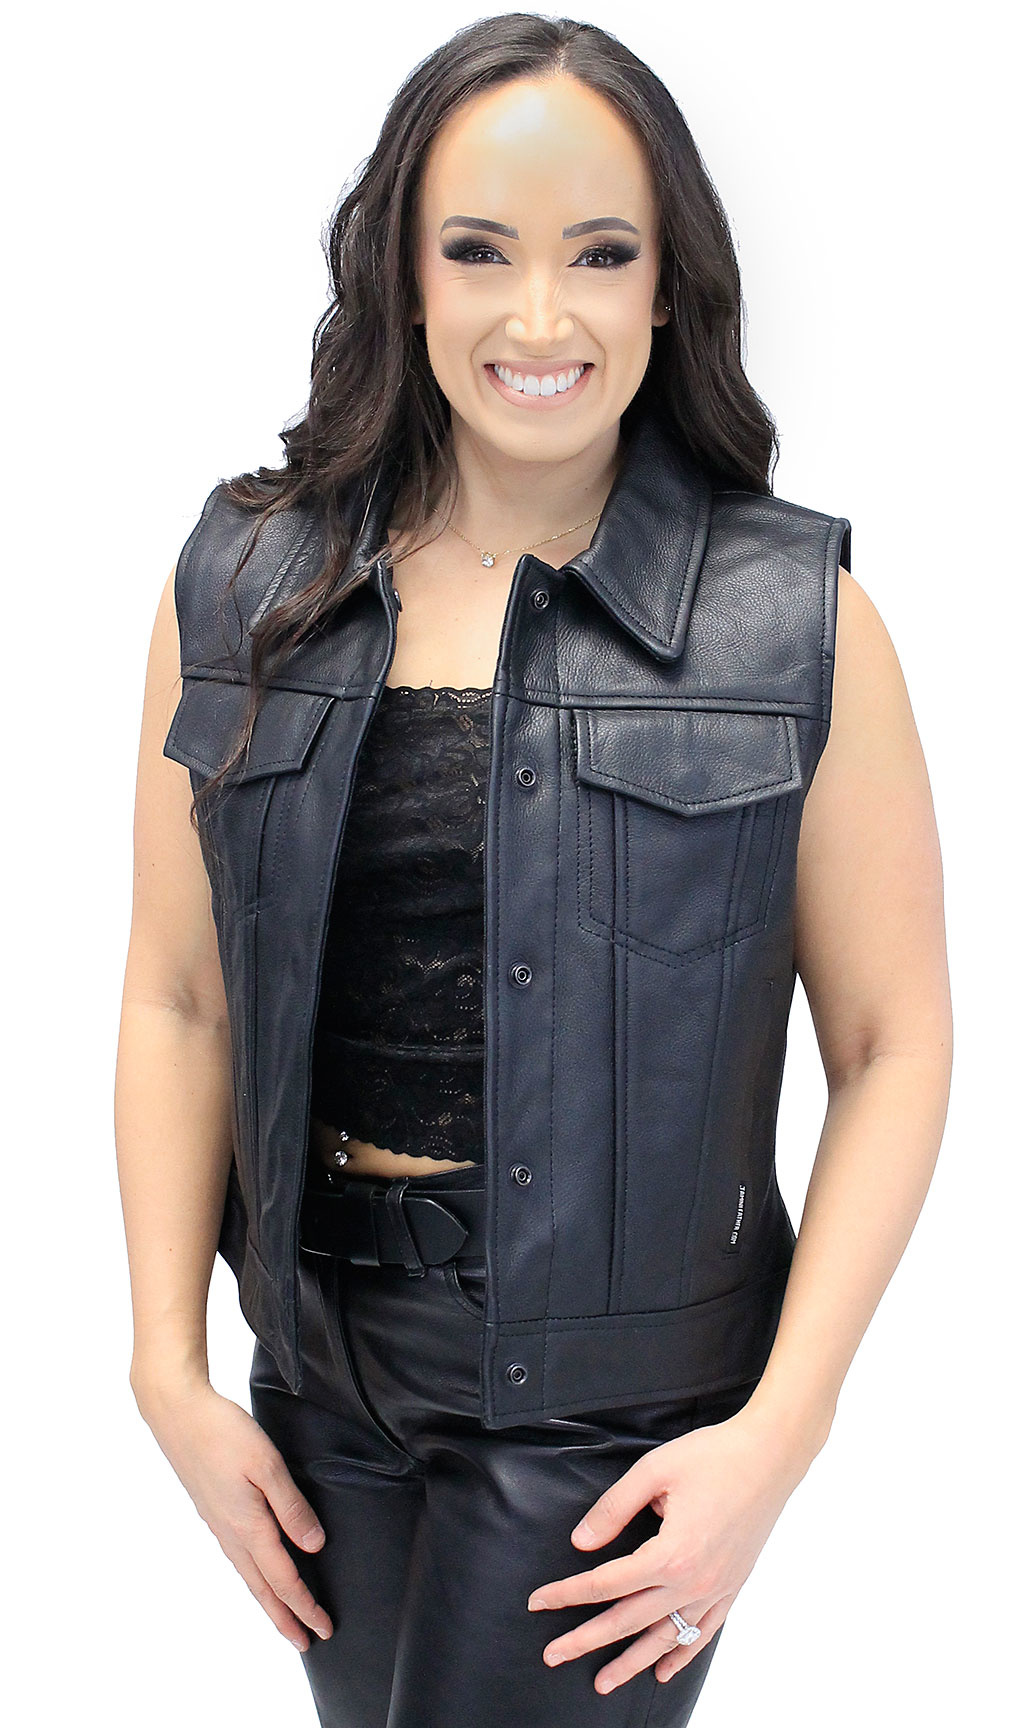 Women's Heavy Leather Club Vest with Concealed Pockets #VL1015HGK ...